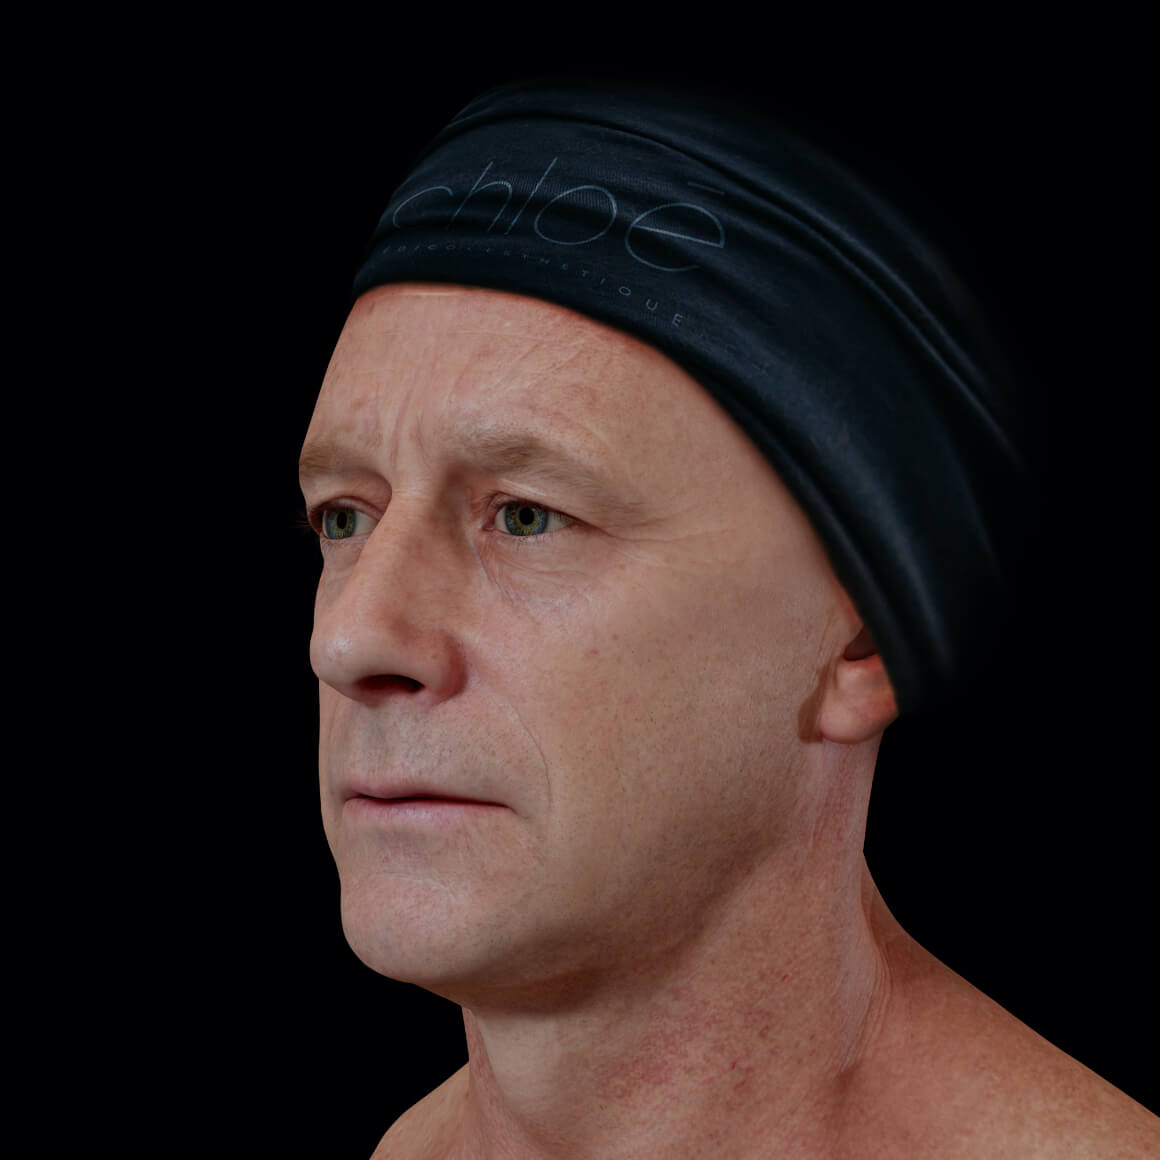 Male patient at Clinique Chloé positioned at an angle after platelet-rich plasma treatments, or PRP, for wrinkle reduction